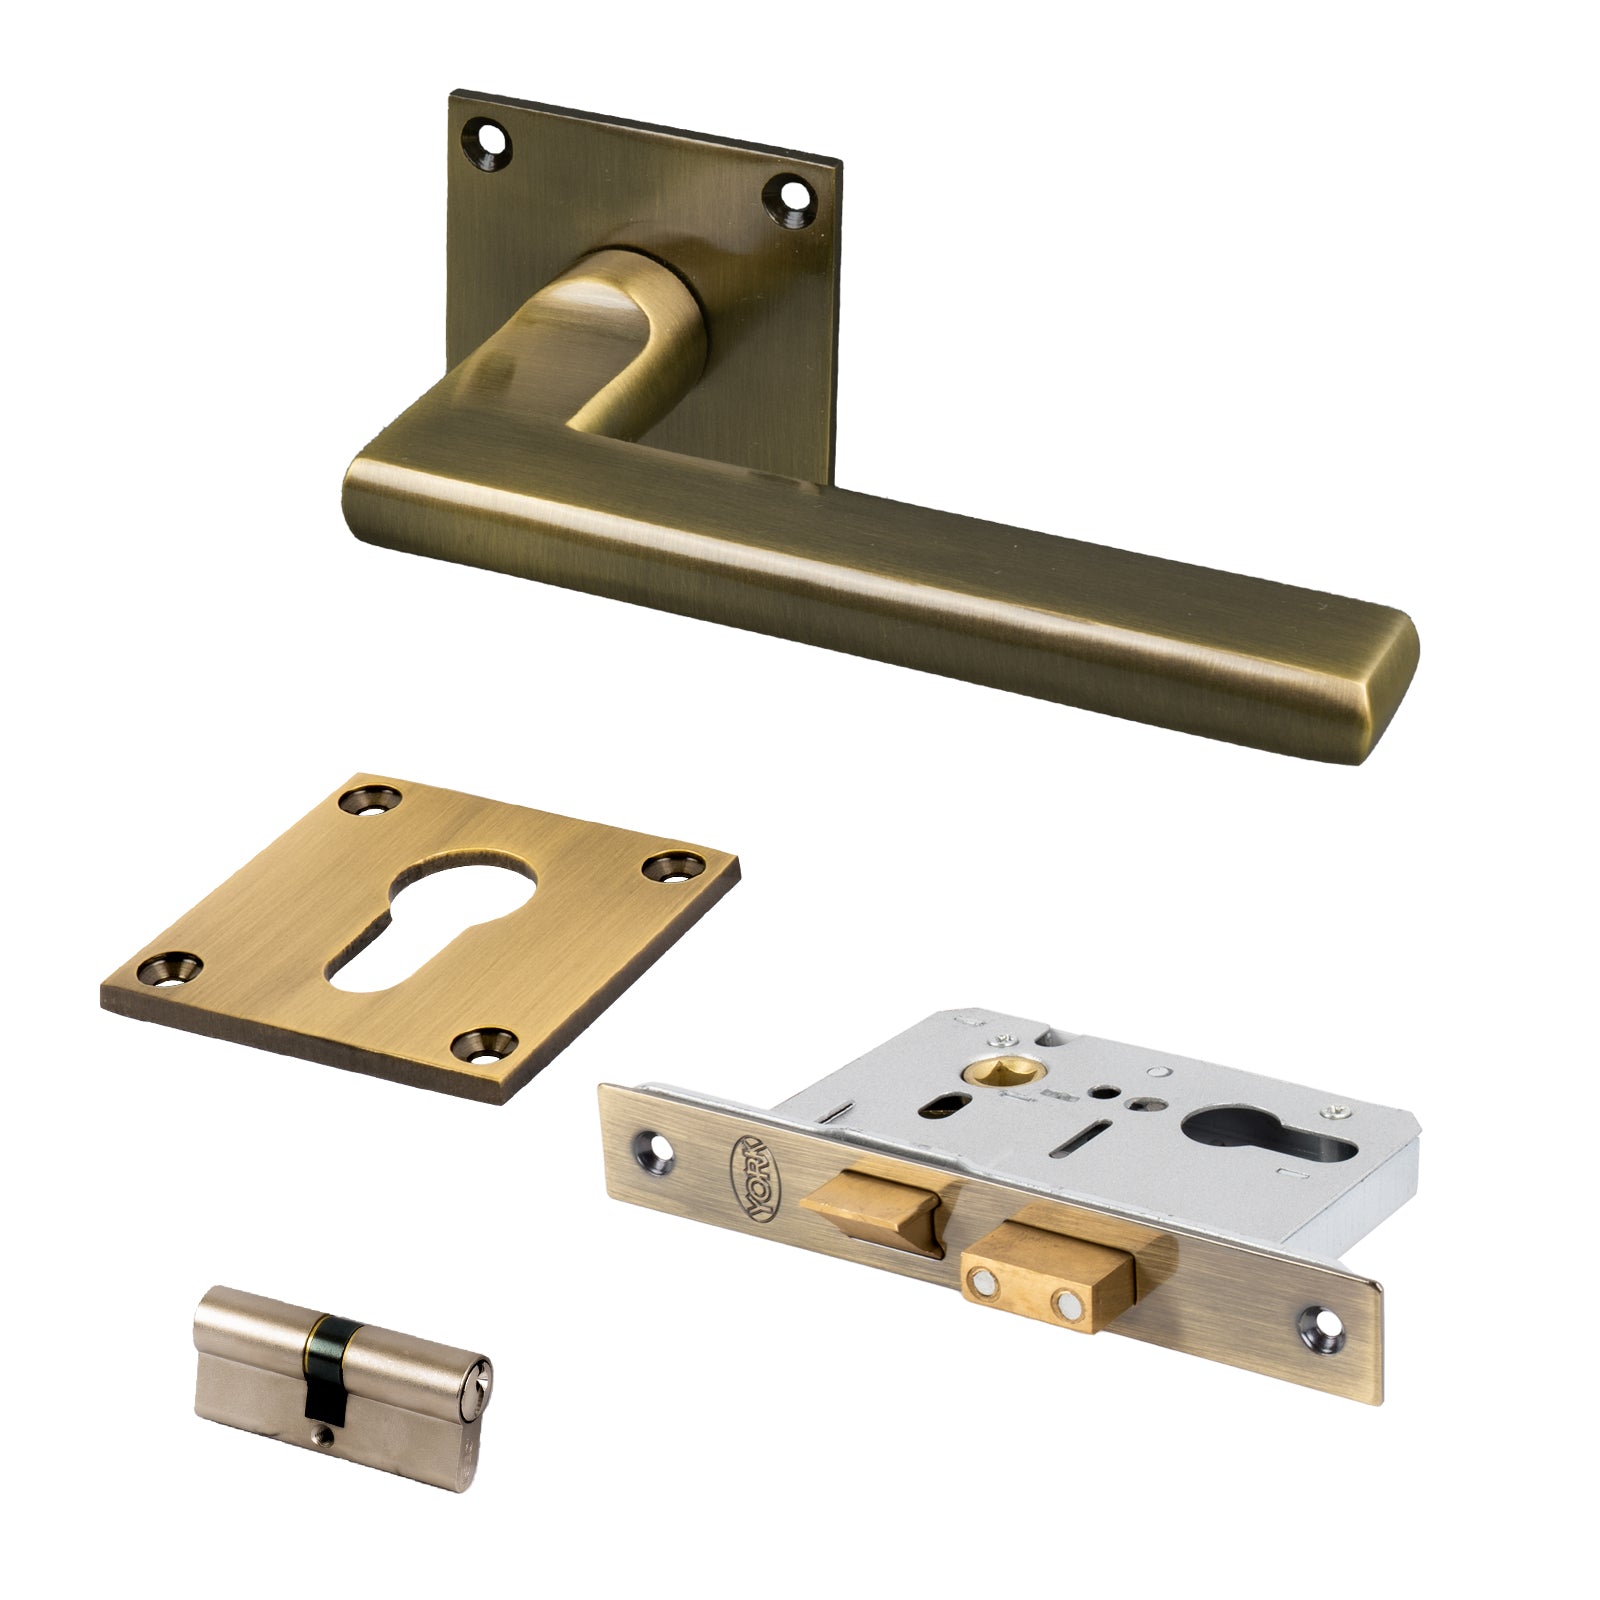 SHOW Trident Square Rose Door Handles Euro Set with Aged Brass finish